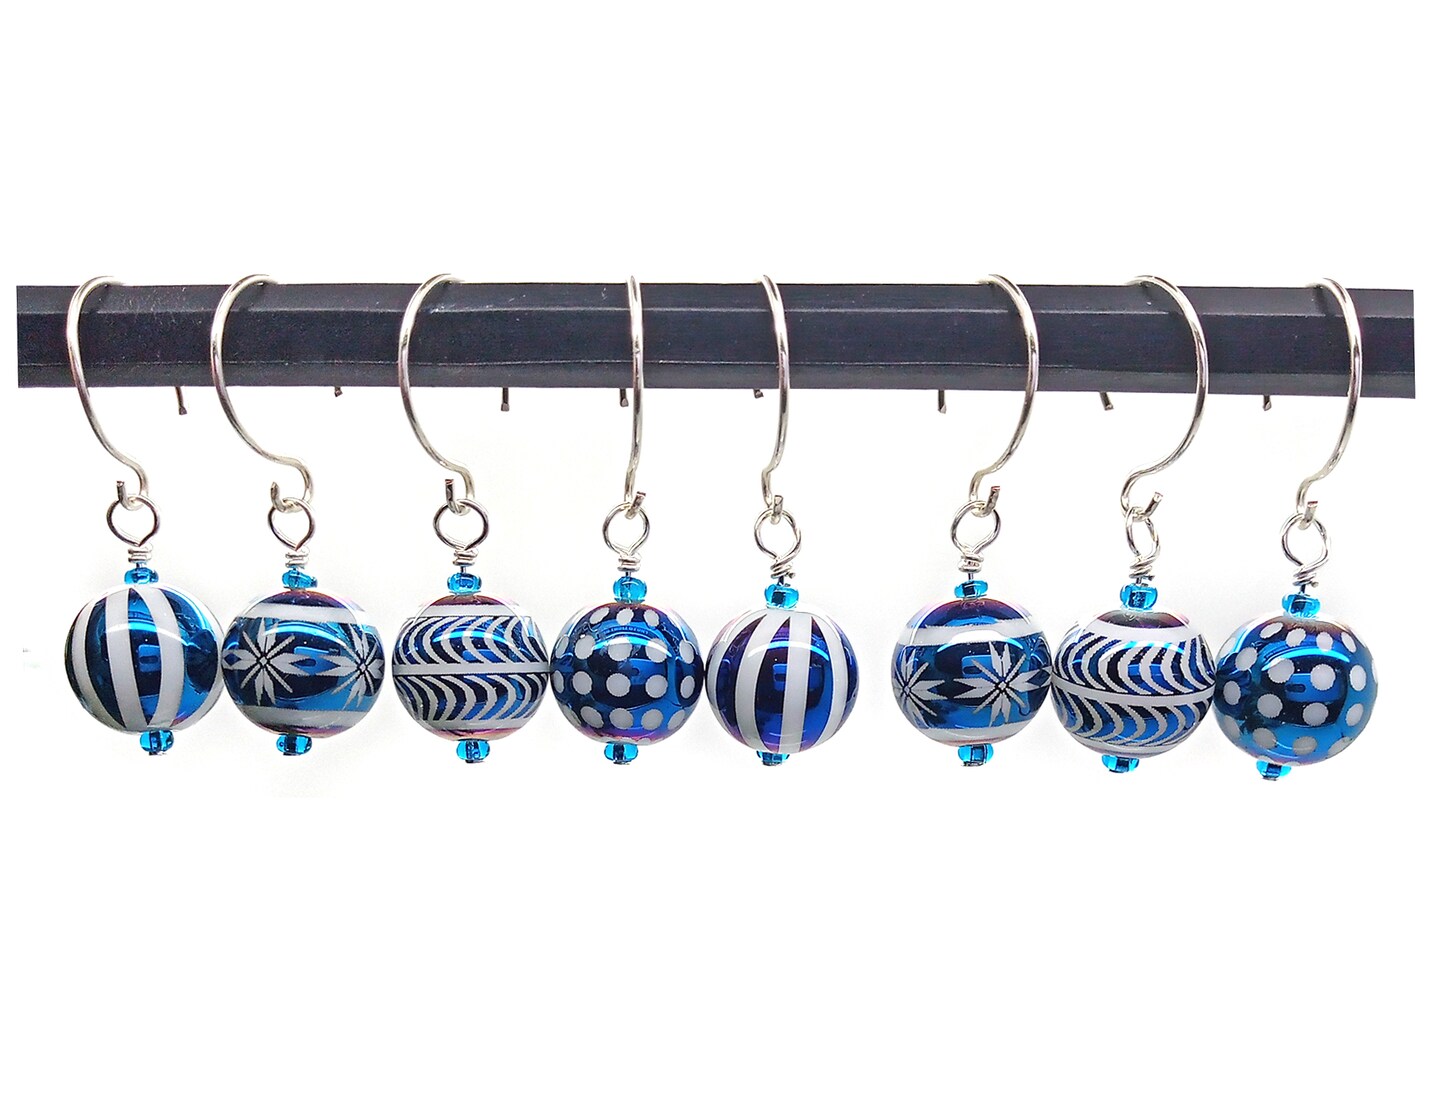 Miniature Christmas Tree Ornaments in Blue Glass, 8 pieces with Hooks, Adorabilities